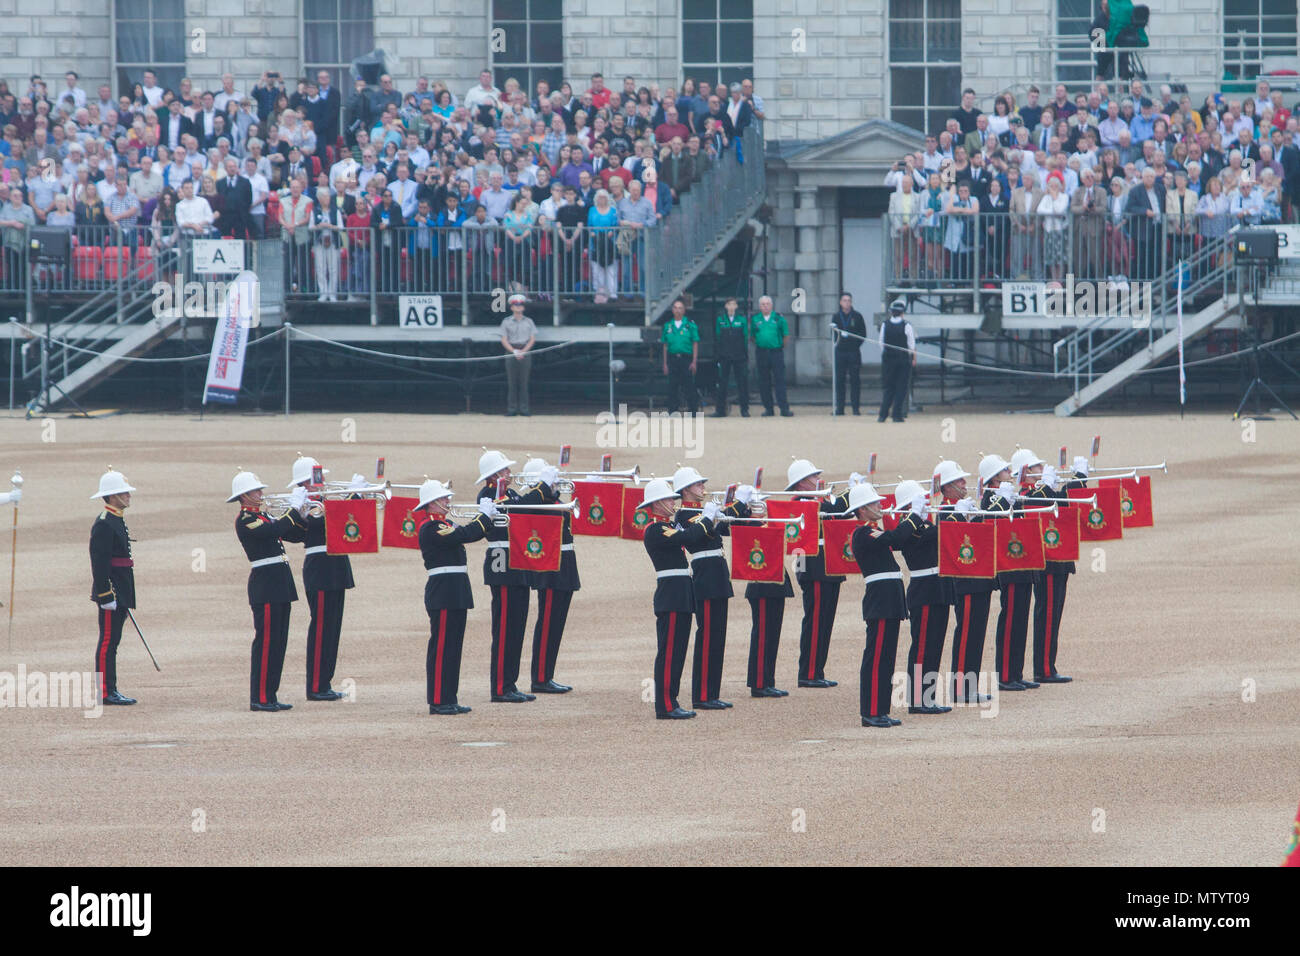 London UK. 31st May 2018. Horse Guards. The Massed bands of Her Majesty's Royal Marines perform Beating Retreat  ceremony attended by HRH William The Duke of Cambridge in an evening extravaganza of pomp and musical ceremony Credit: amer ghazzal/Alamy Live News Stock Photo